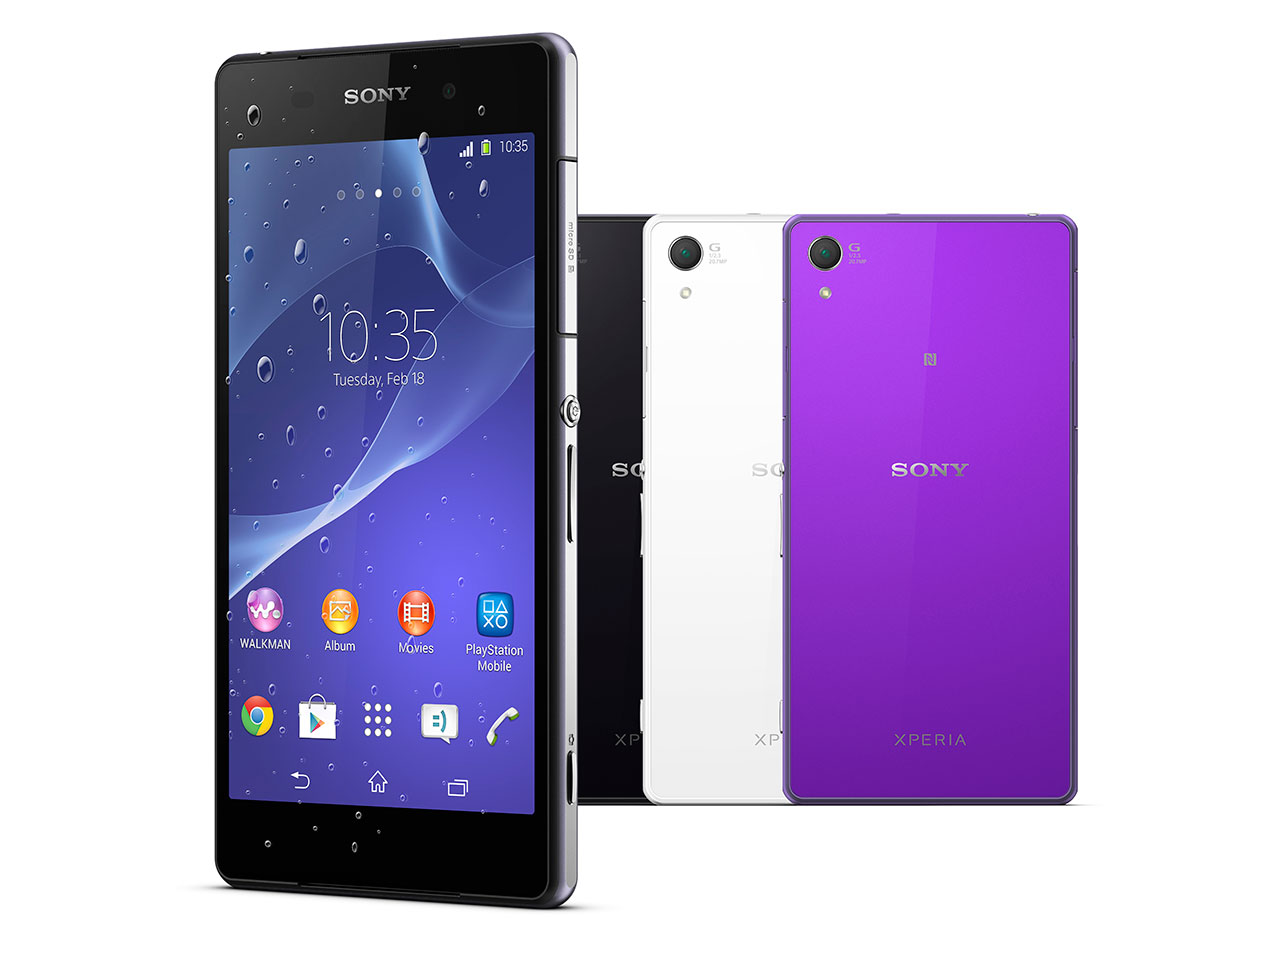 Unboxing Xperia Z2: What’s Included In The Package